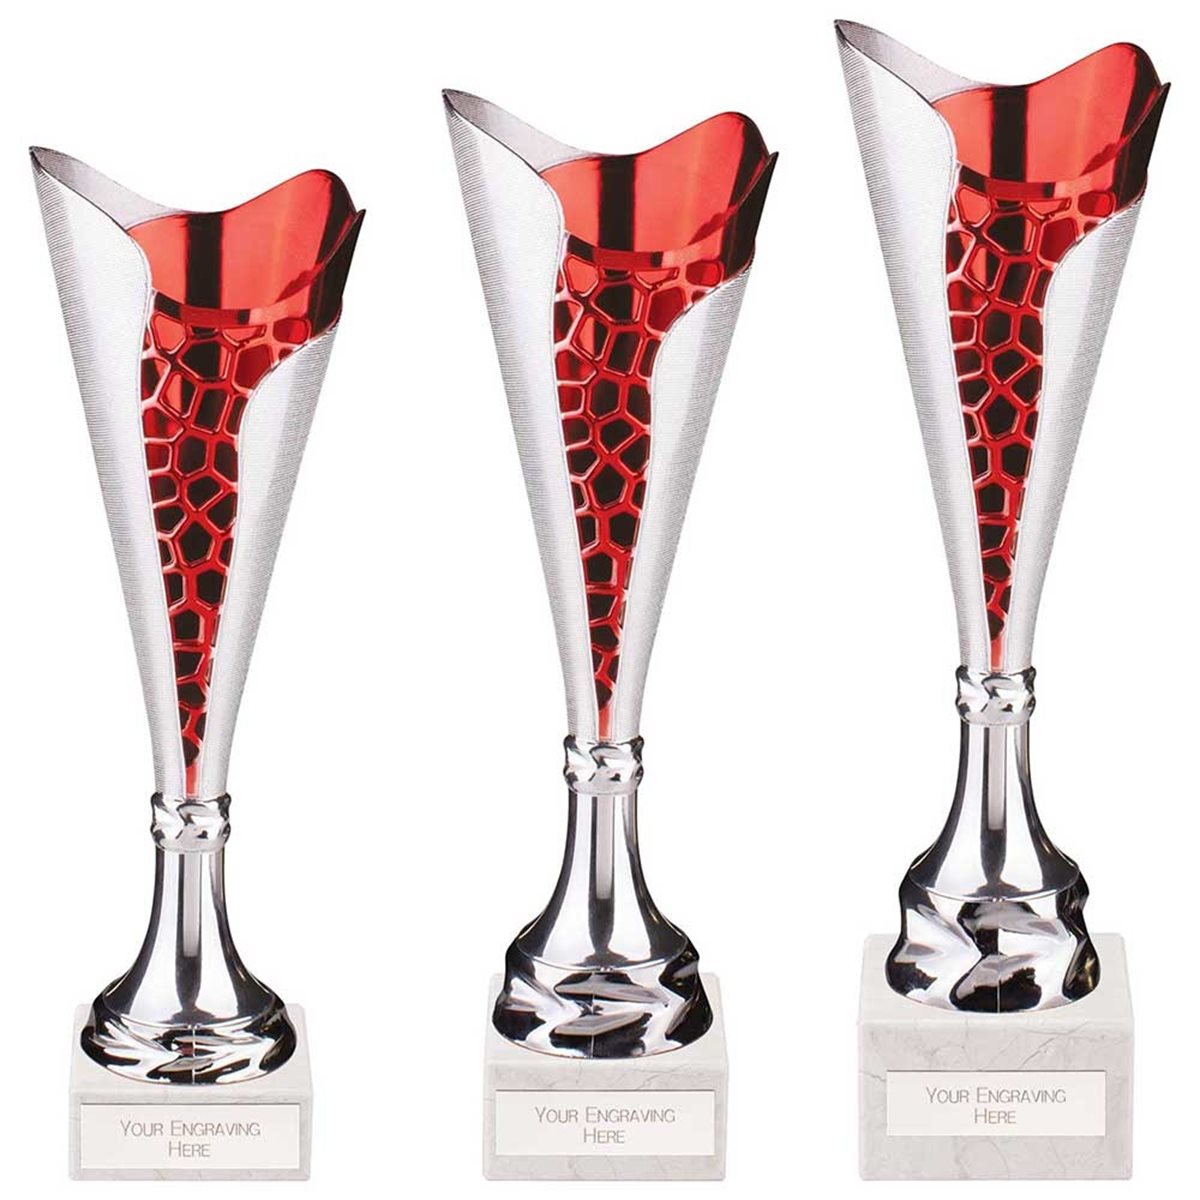 Utopia Classic Cup Silver & Red